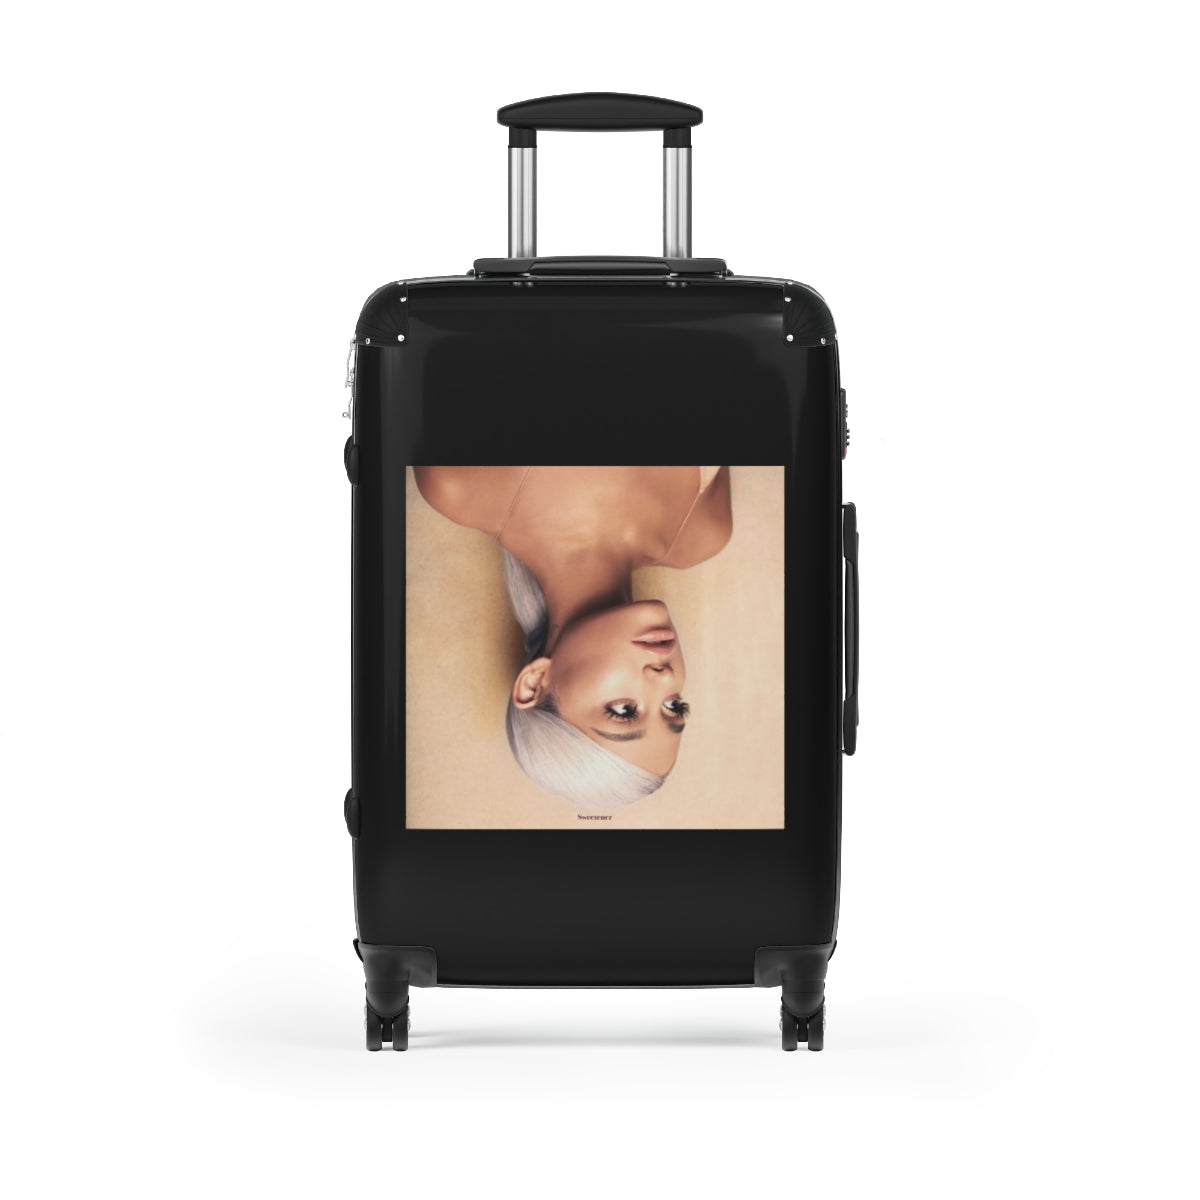 Getrott Ariana Grande Sweetener 2018 Black Cabin Suitcase Inner Pockets Extended Storage Adjustable Telescopic Handle Inner Pockets Double wheeled Polycarbonate Hard-shell Built-in Lock